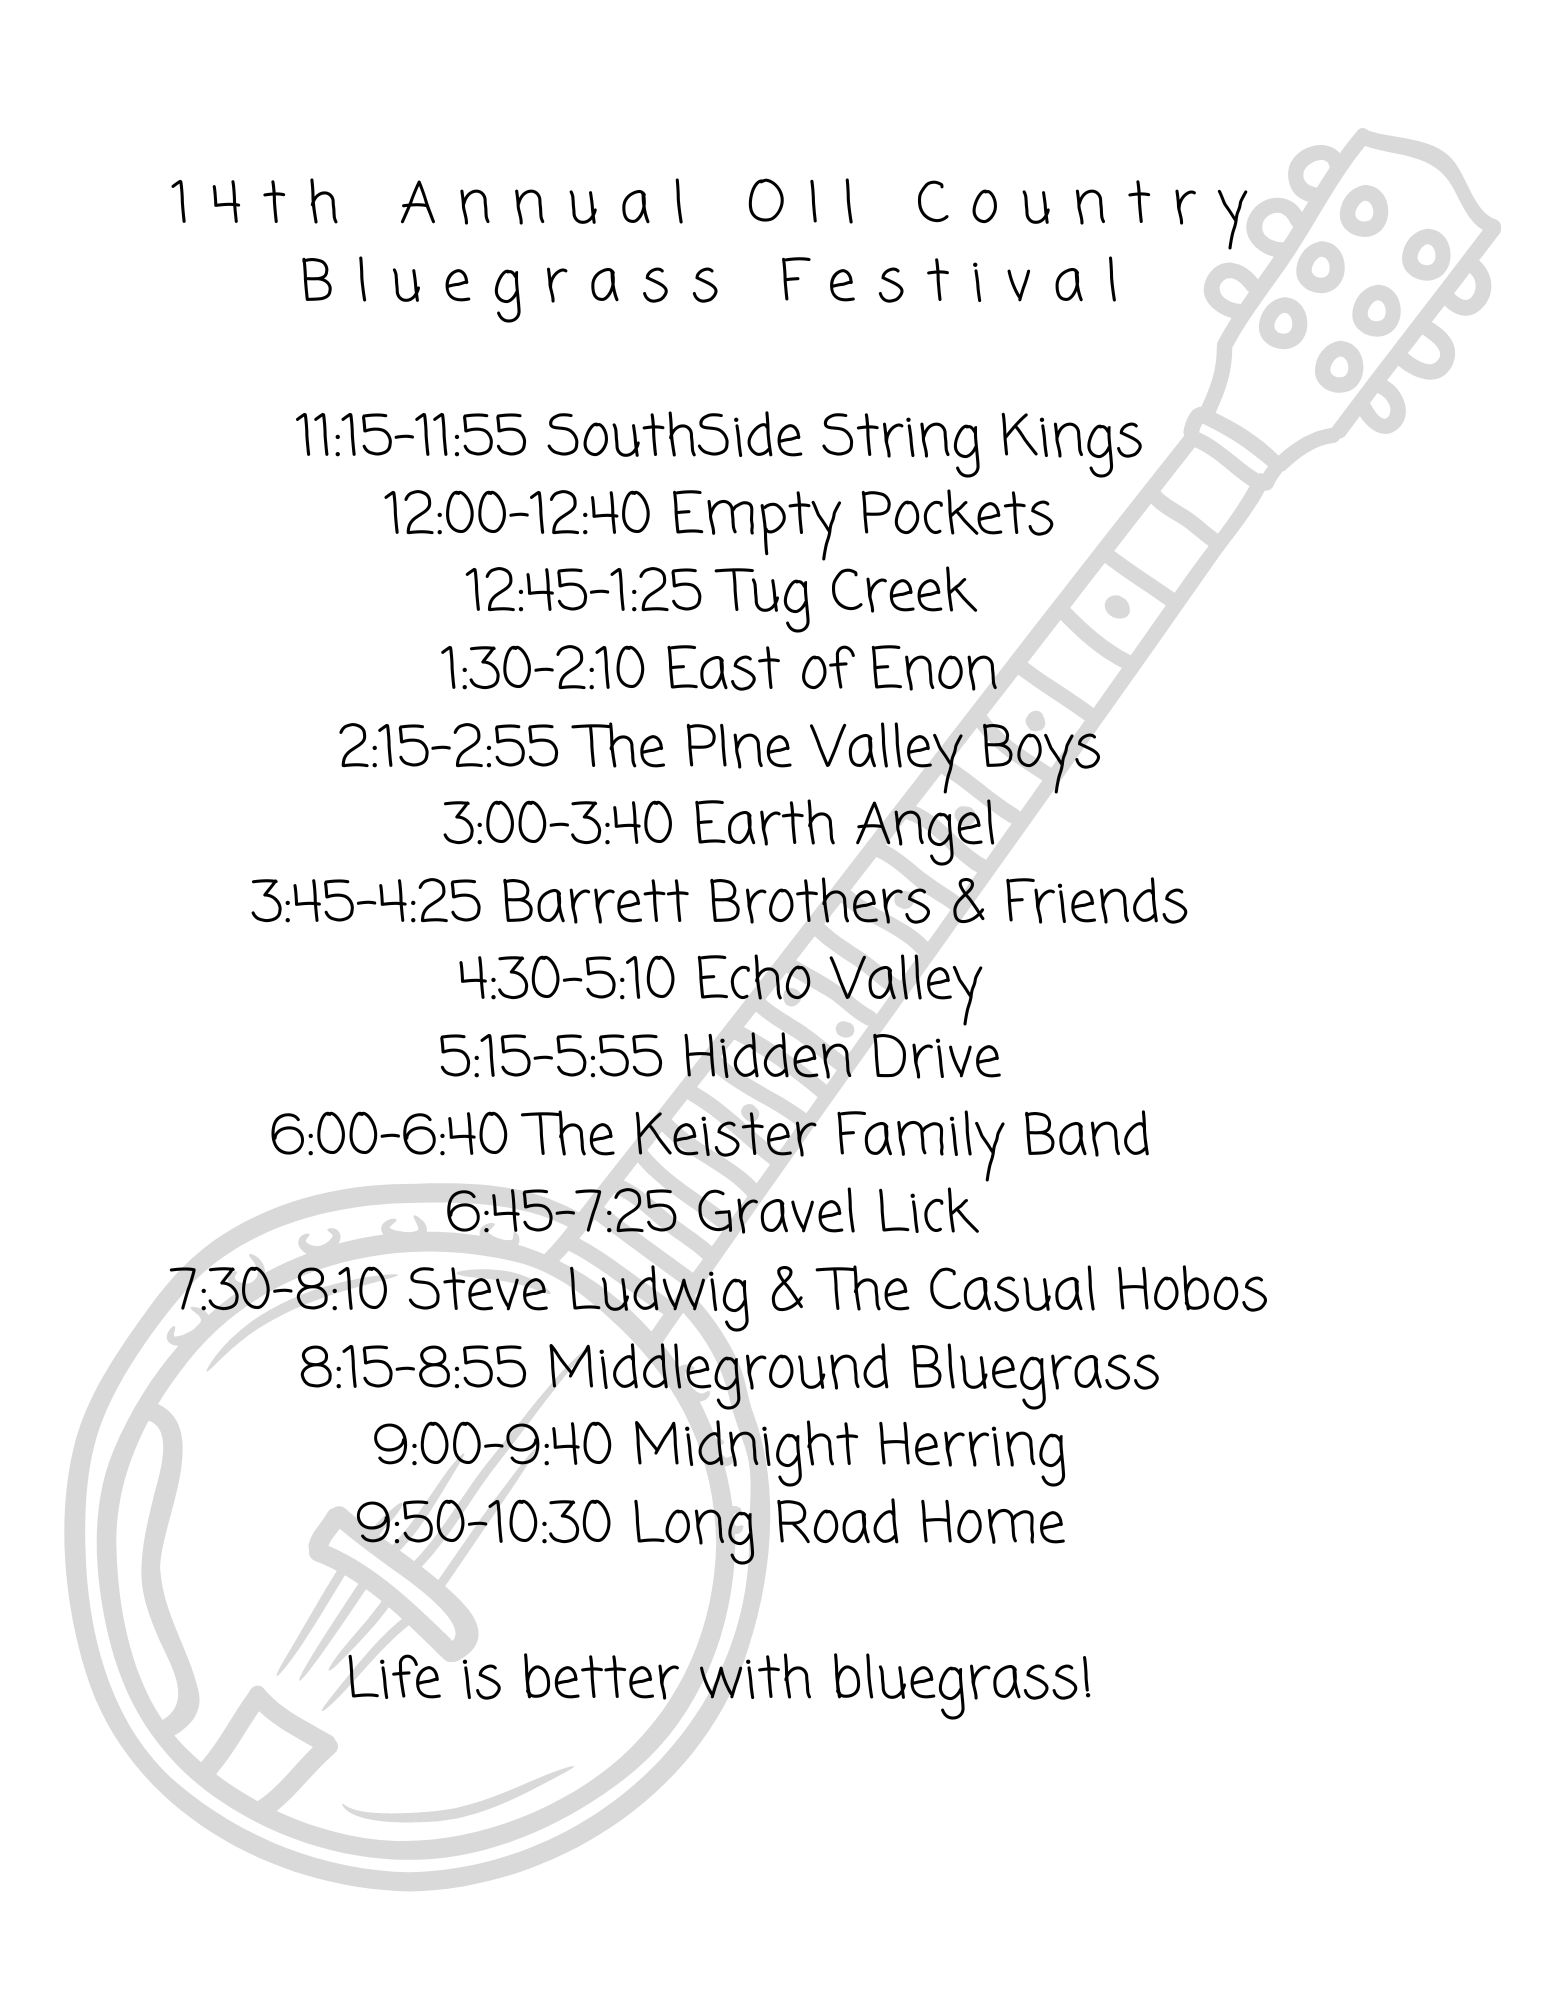 14th Annual Oil Country Bluegrass Festival